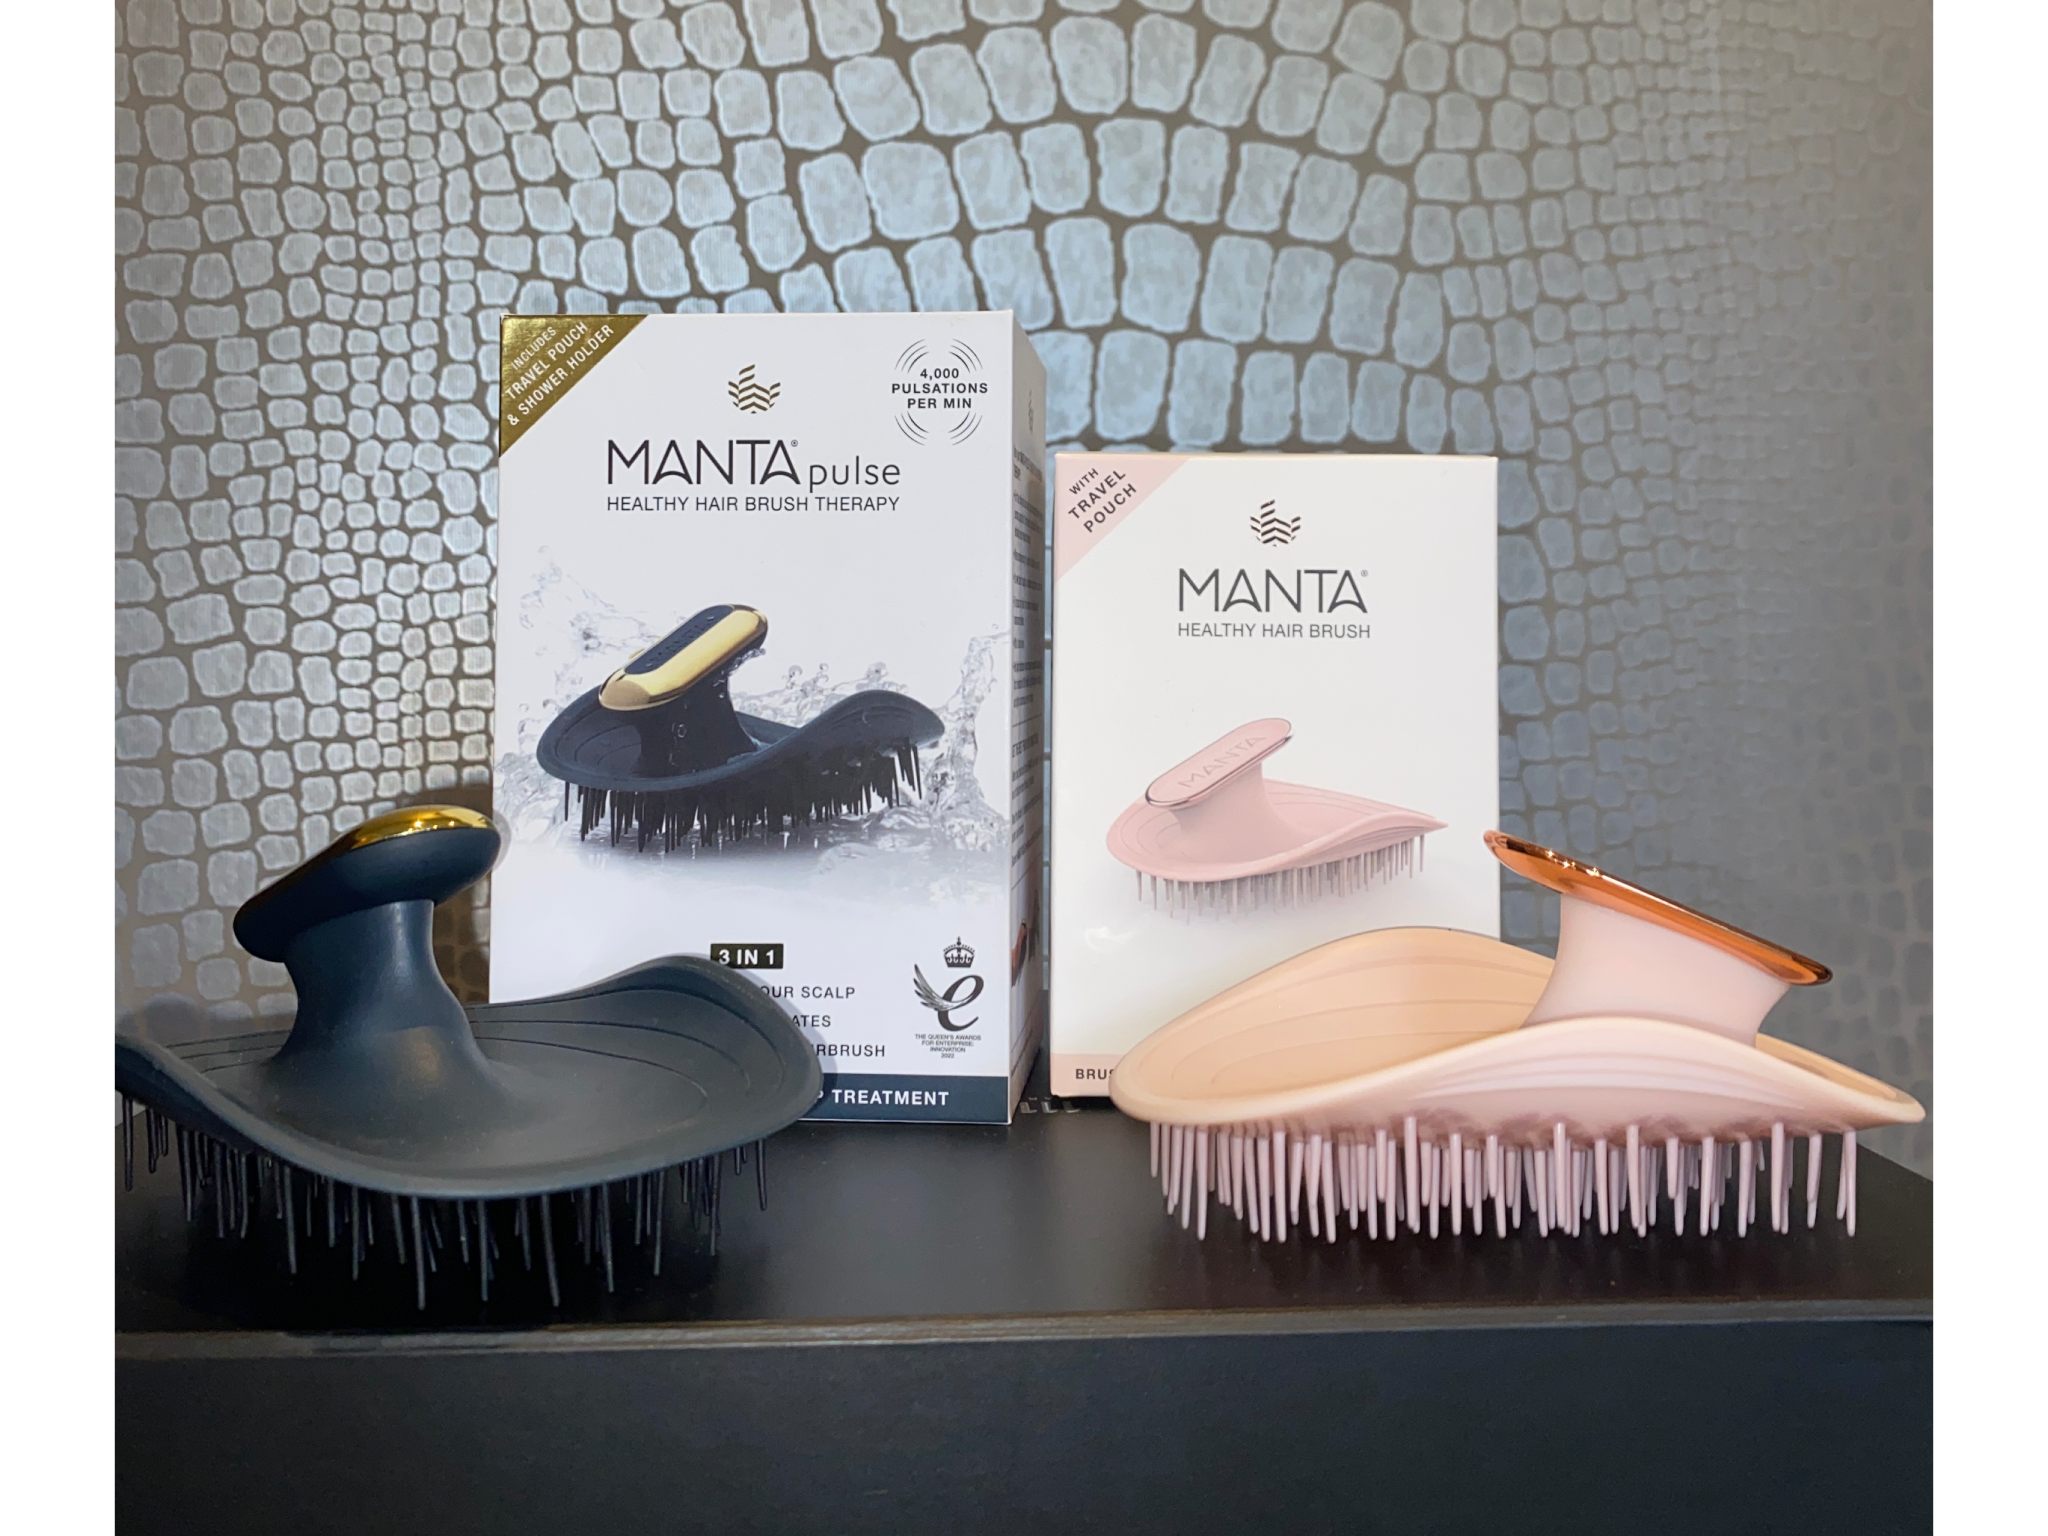 The Manta hairbrushes that were tested